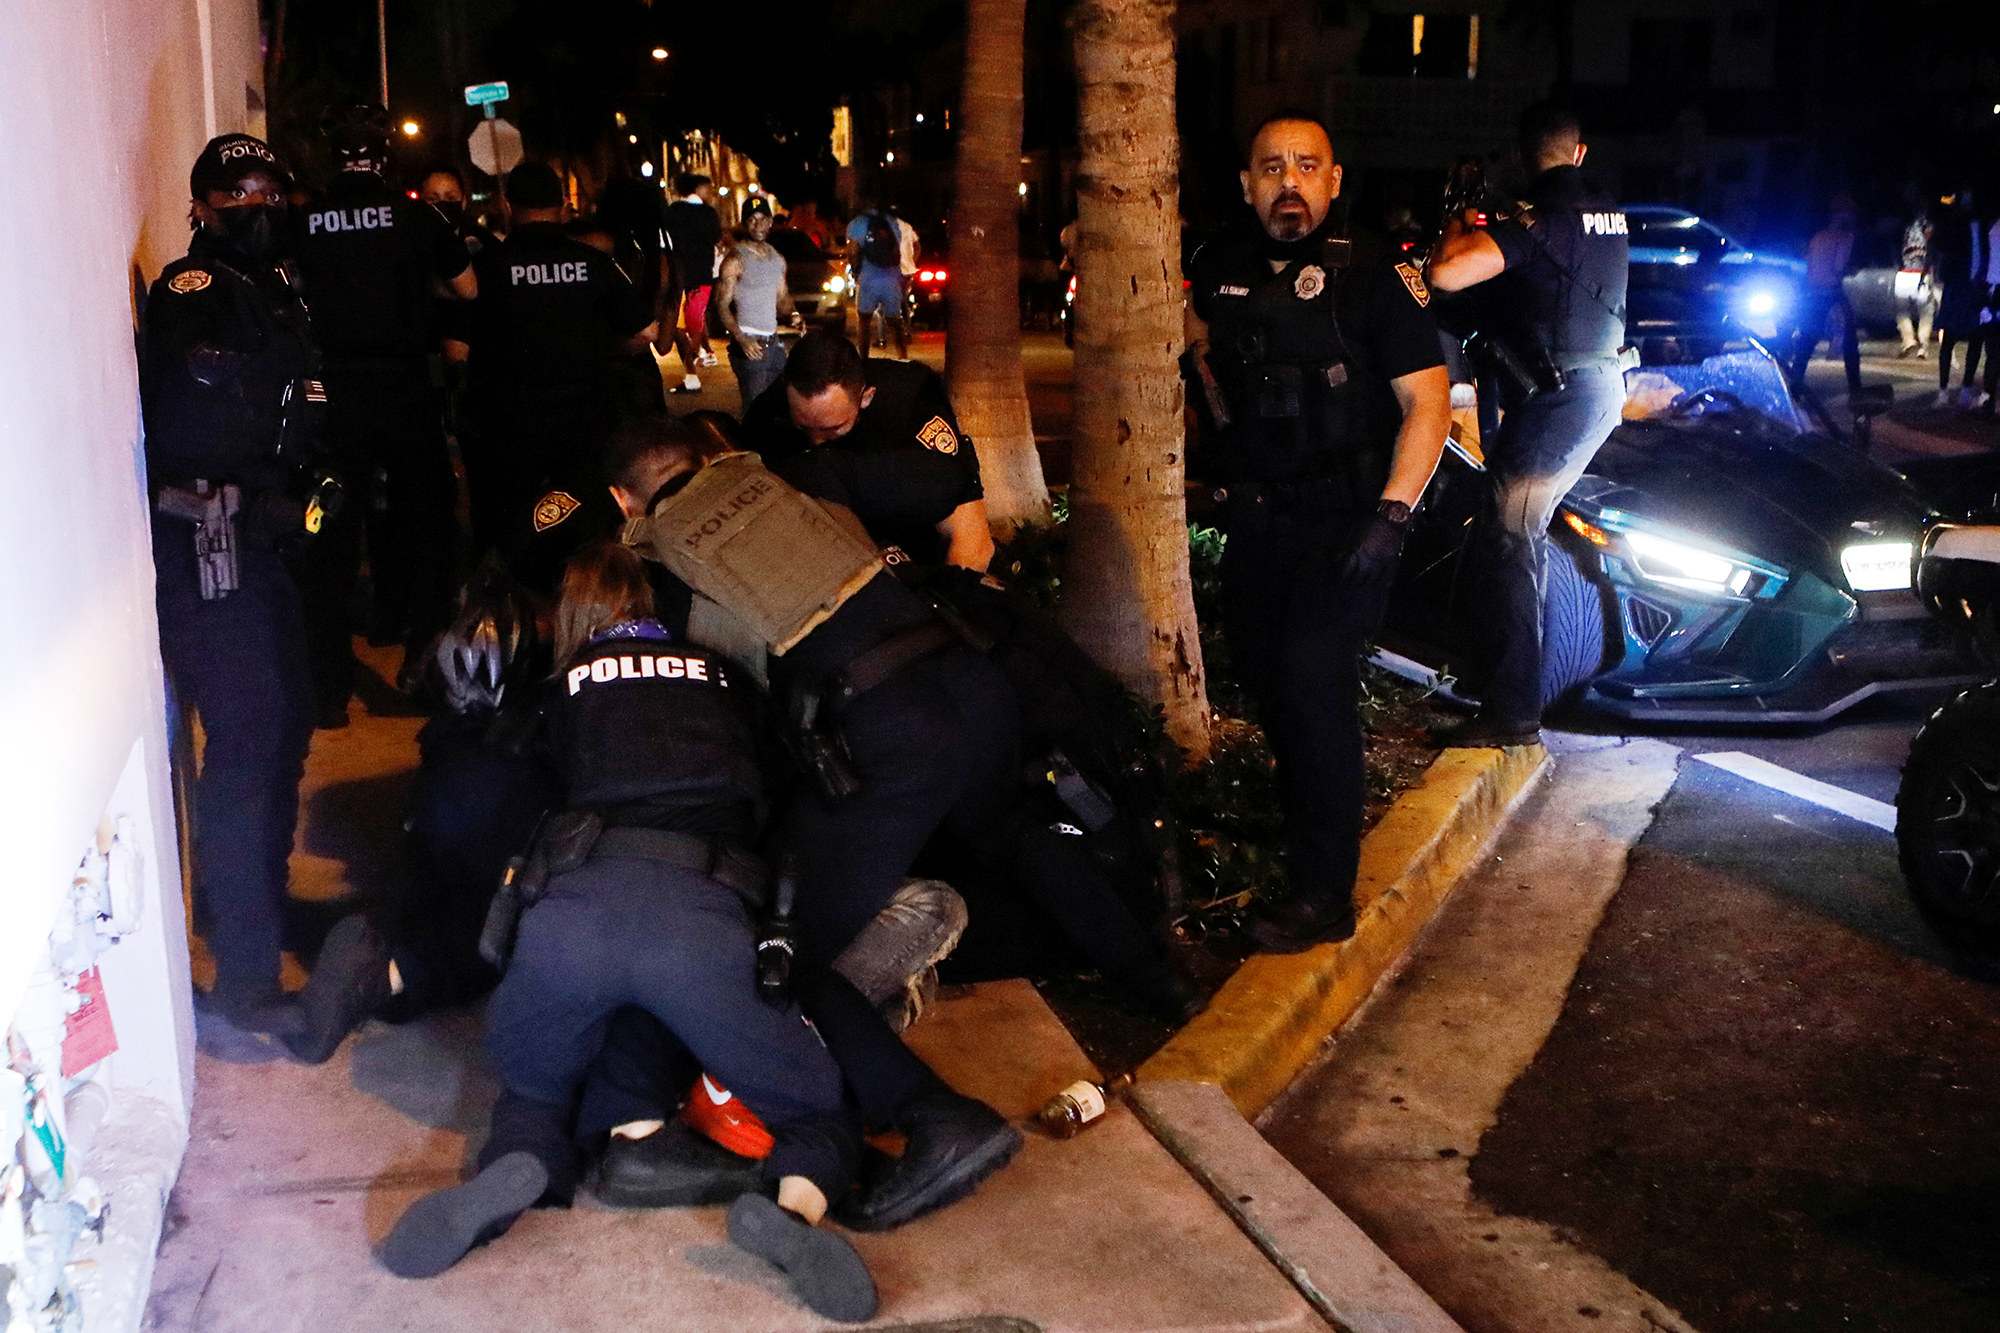 At least 6 police officers tackle a person on the ground, unseen